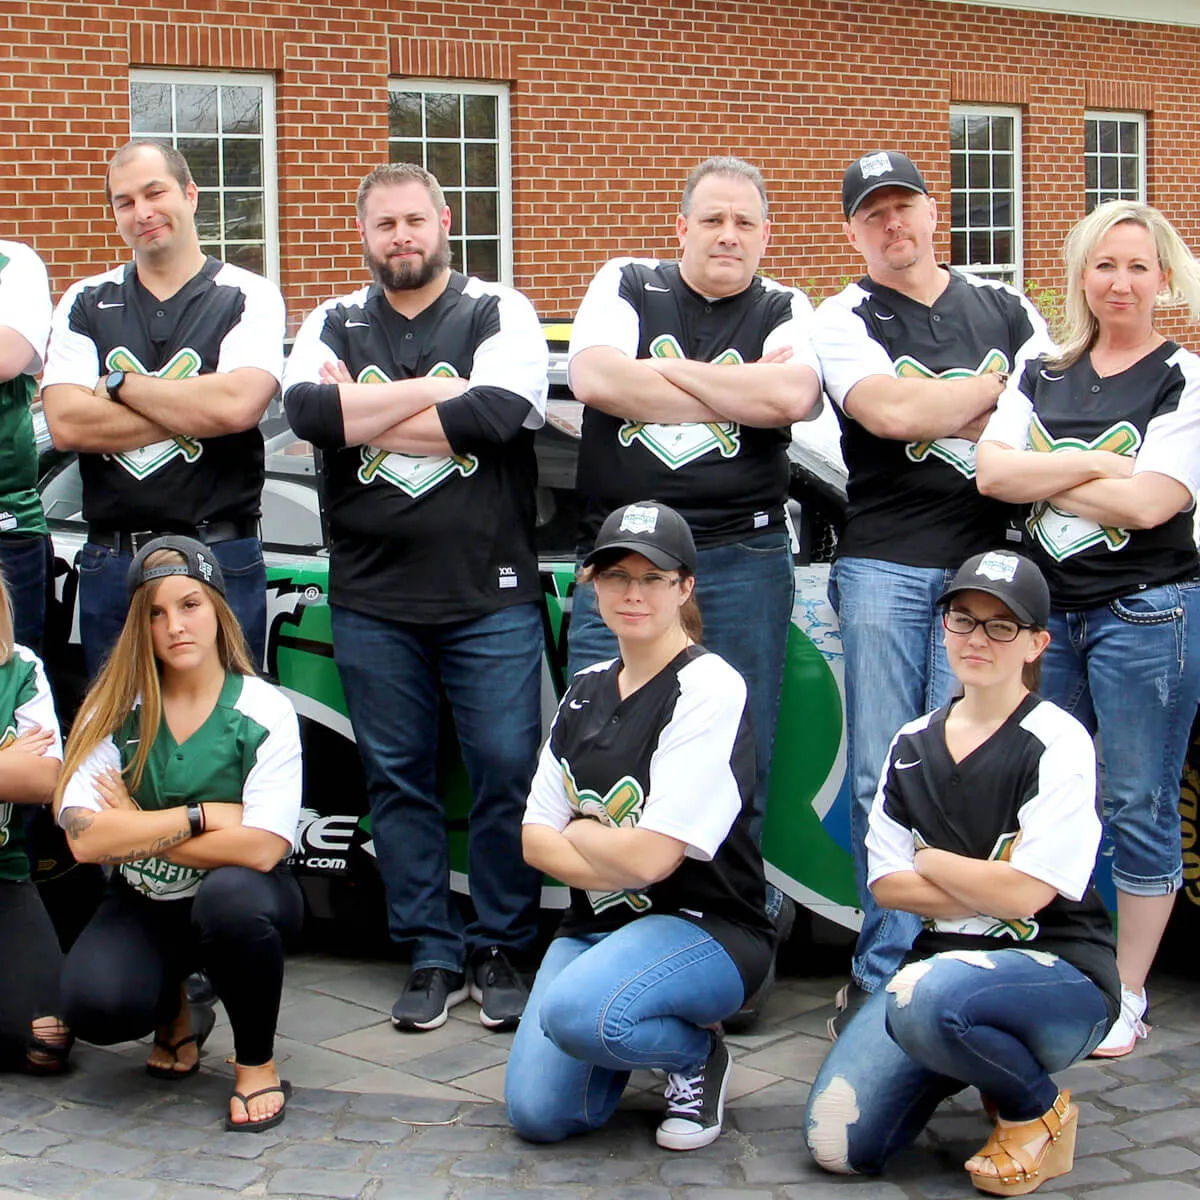 LeafFilter members pose in front of the company Nascar